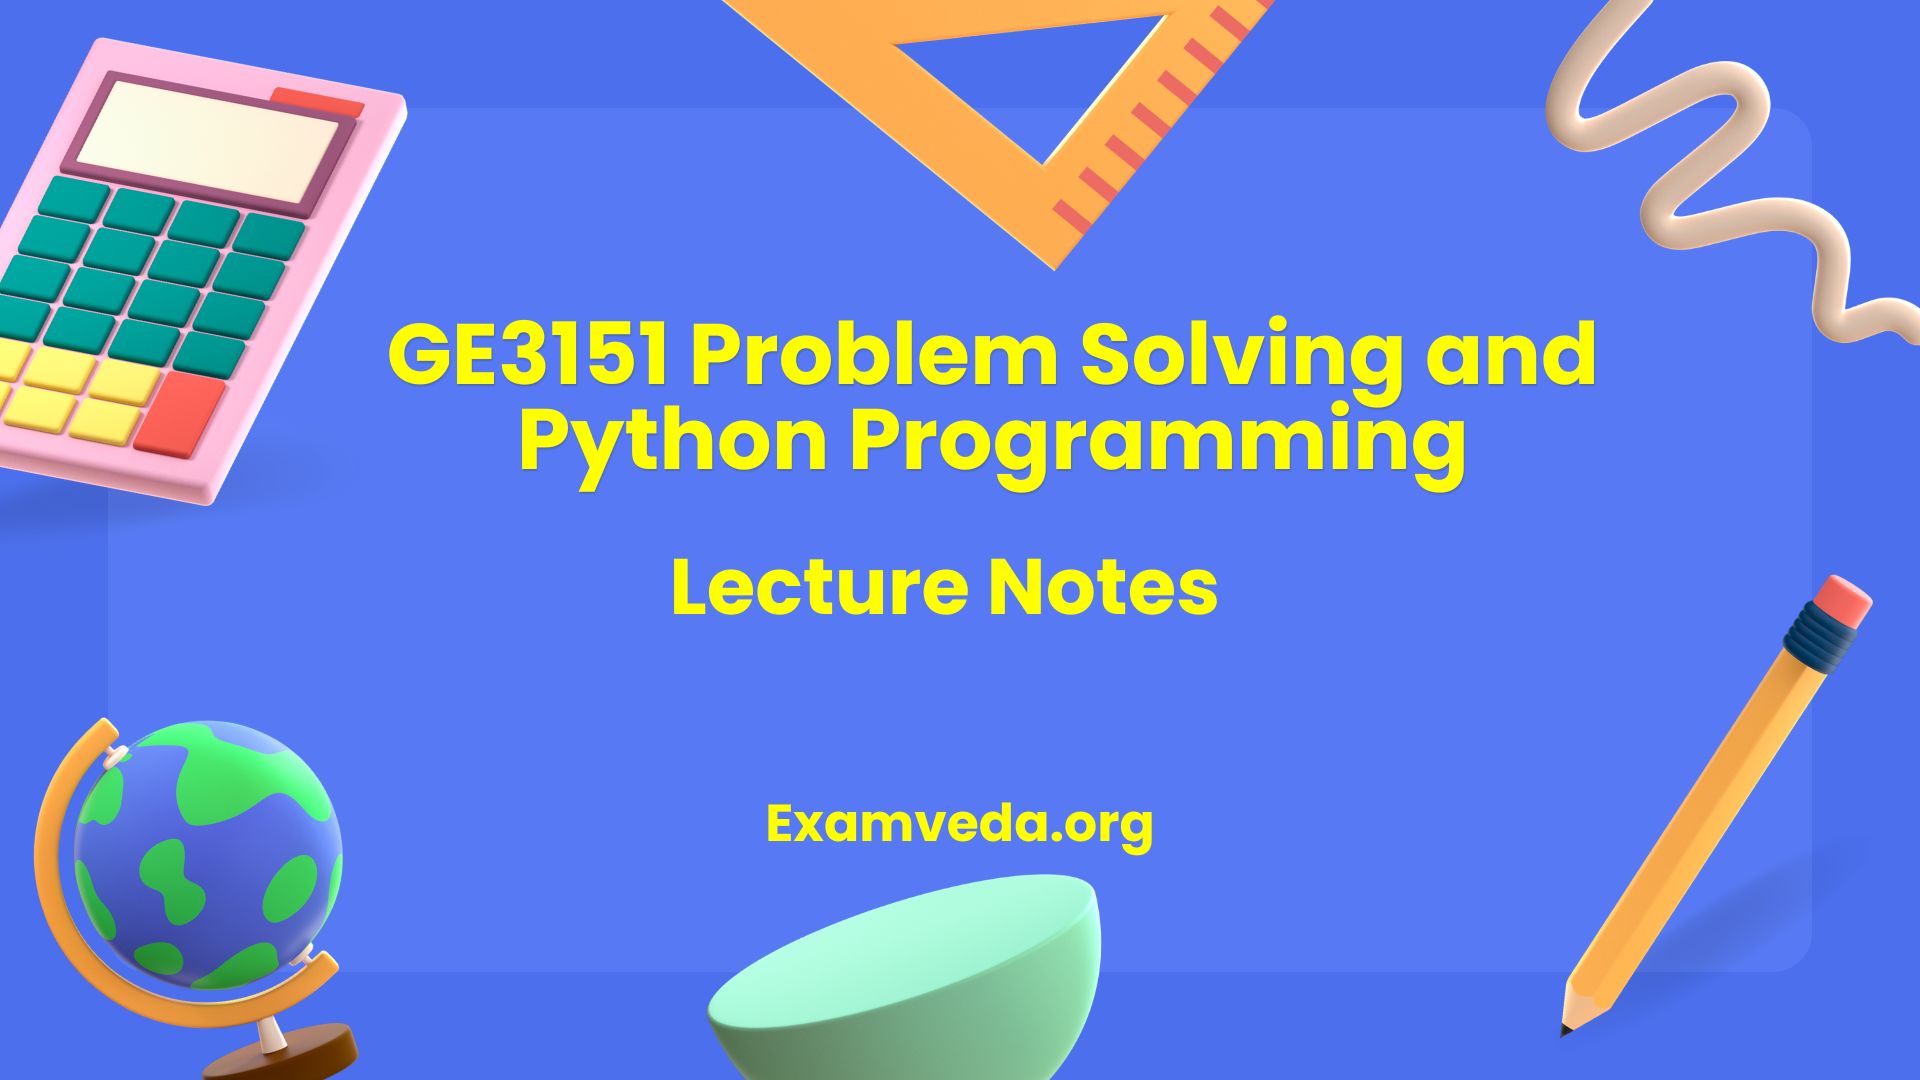 GE3151 Problem Solving and Python Programming Notes